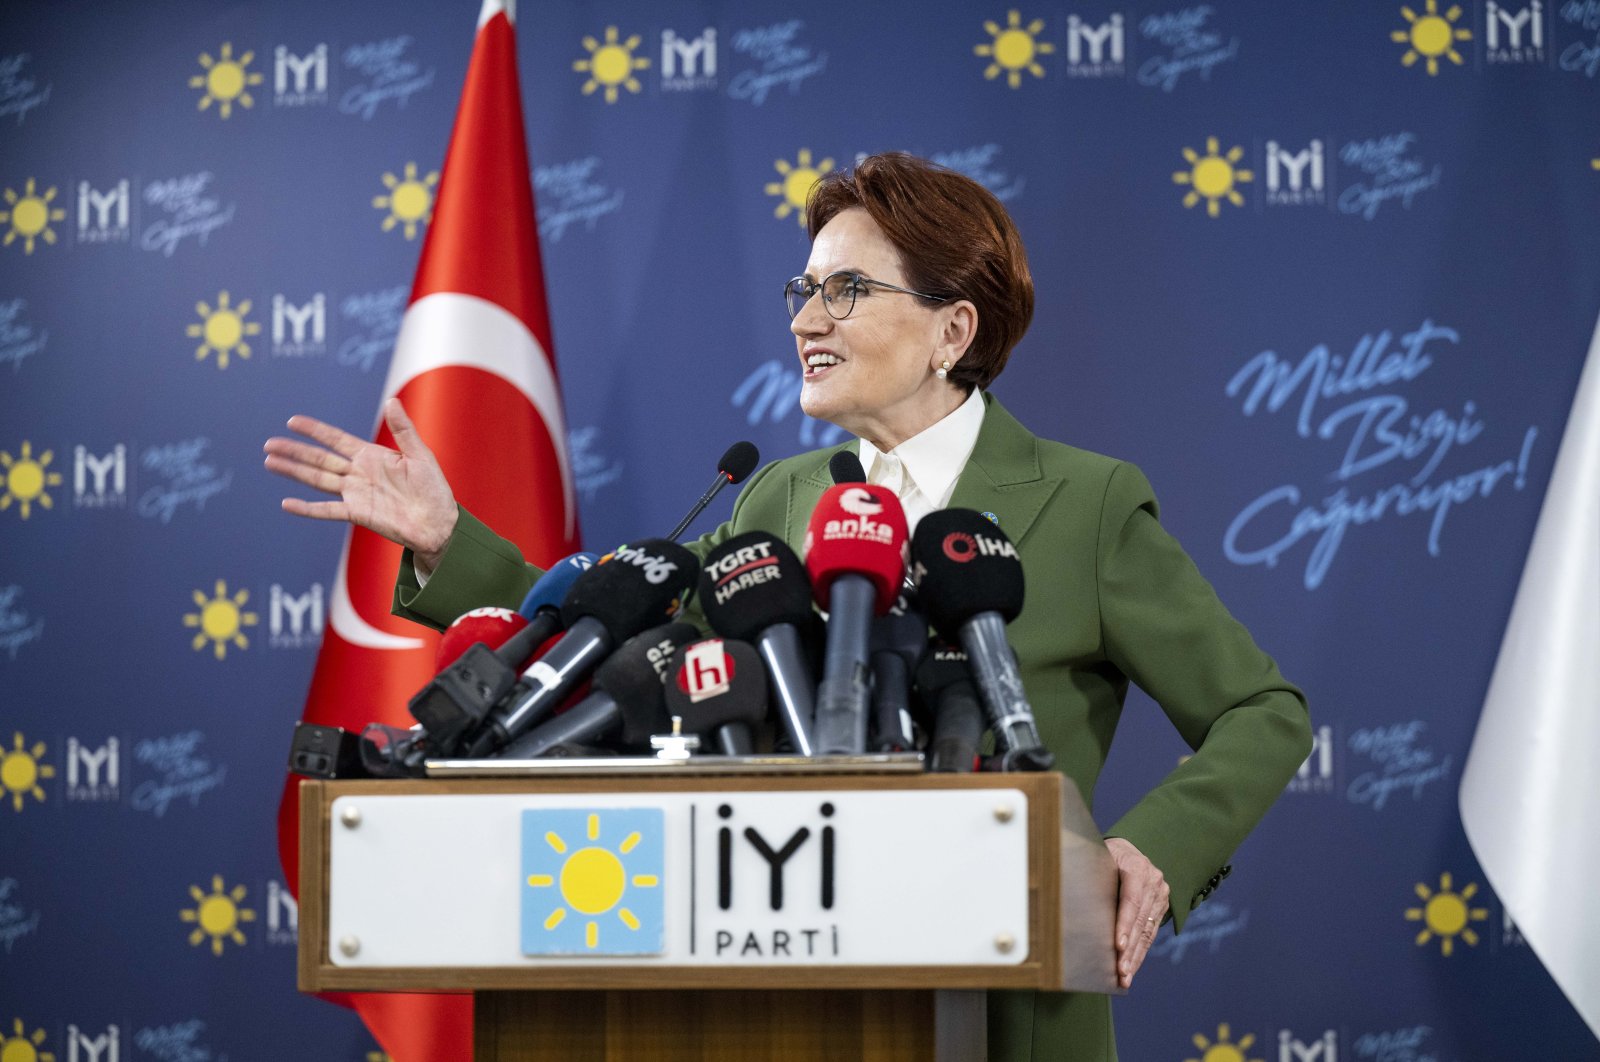 Good Party Chairperson Meral Akşener speaks at a news conference in the capital Ankara, Türkiye, March 3, 2023. (AA Photo)